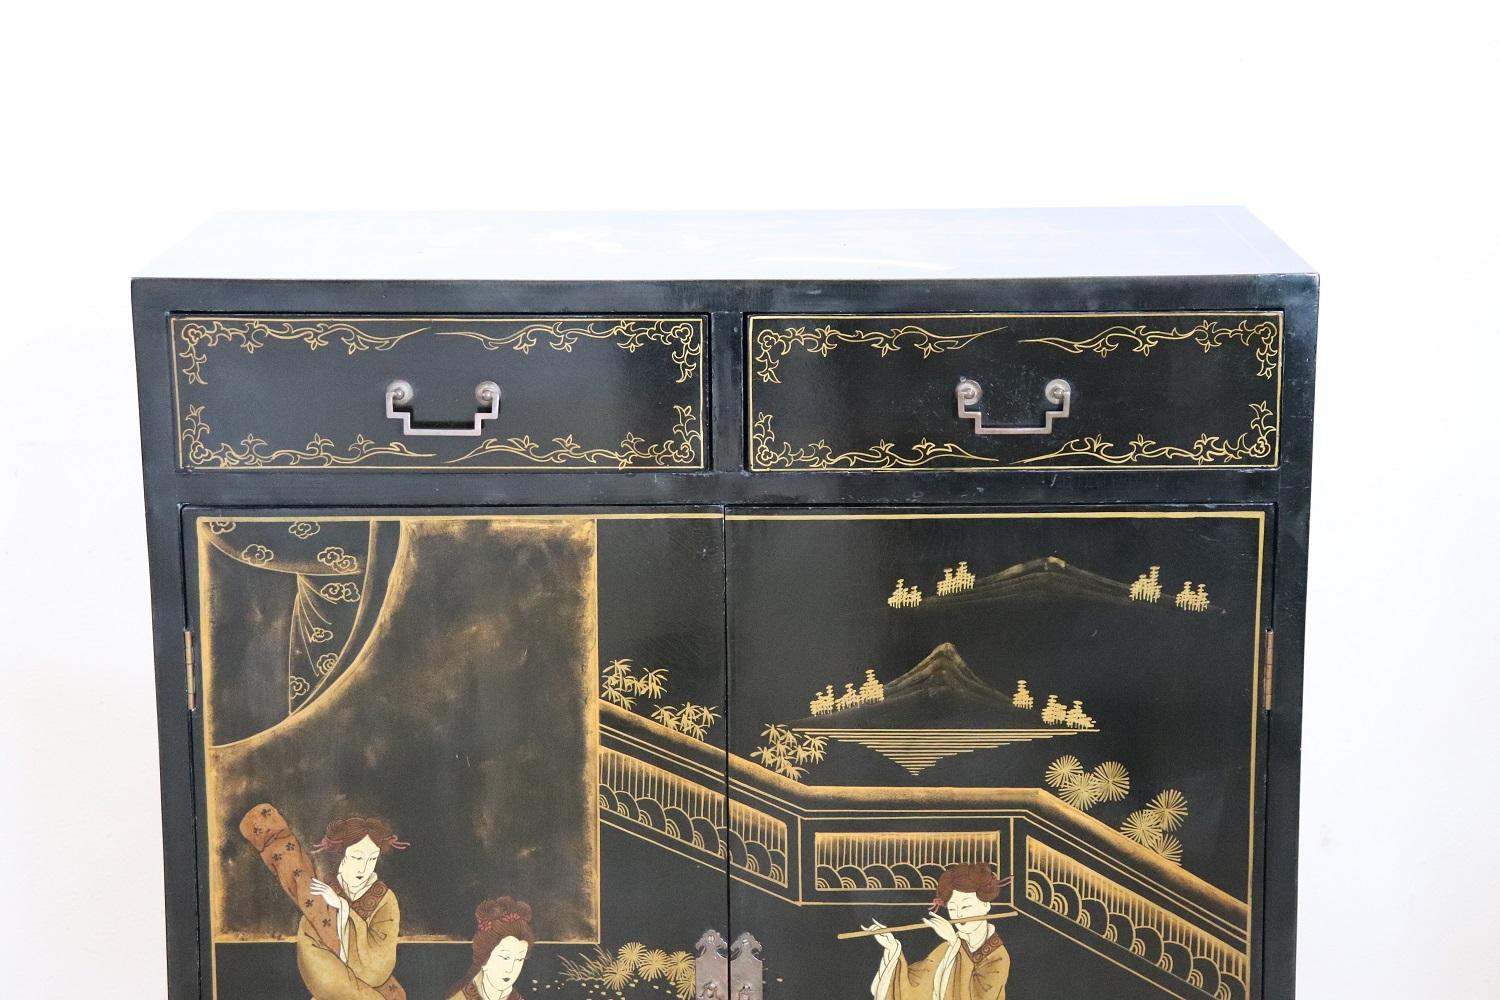 French beautiful small cabinet 1960s. Made of black lacquered wood, refined hand painted gold decorations in japanese style. On the front doors there is a beautiful animated scene with young geishas playing musical instruments. On the sides flowers